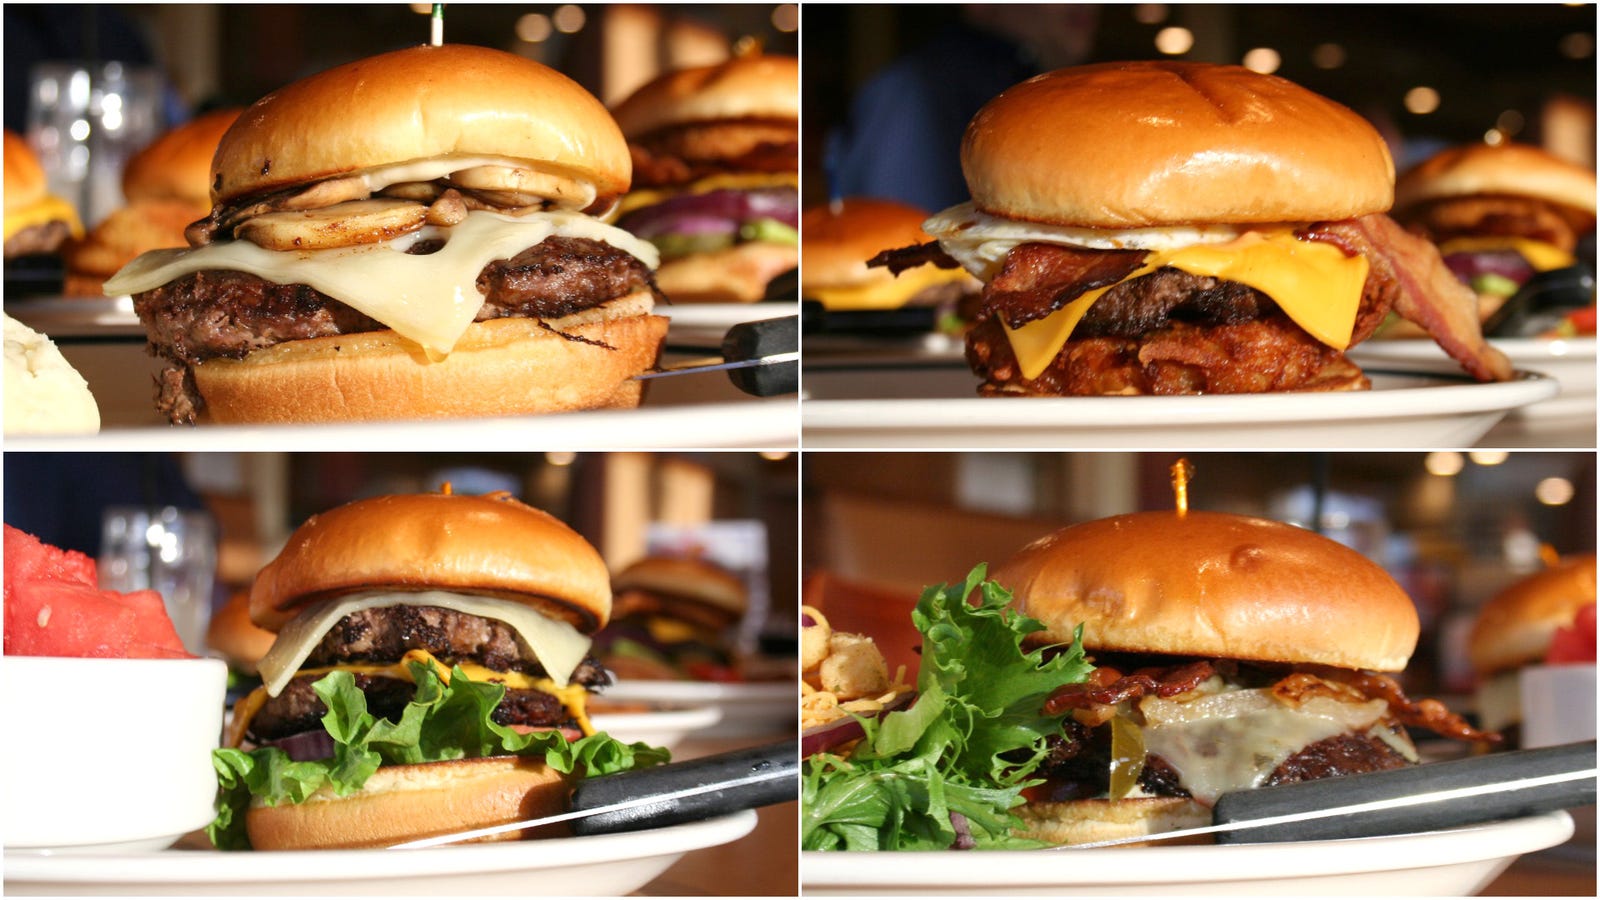 I ordered and tasted all of the IHOP burgers, for journalism